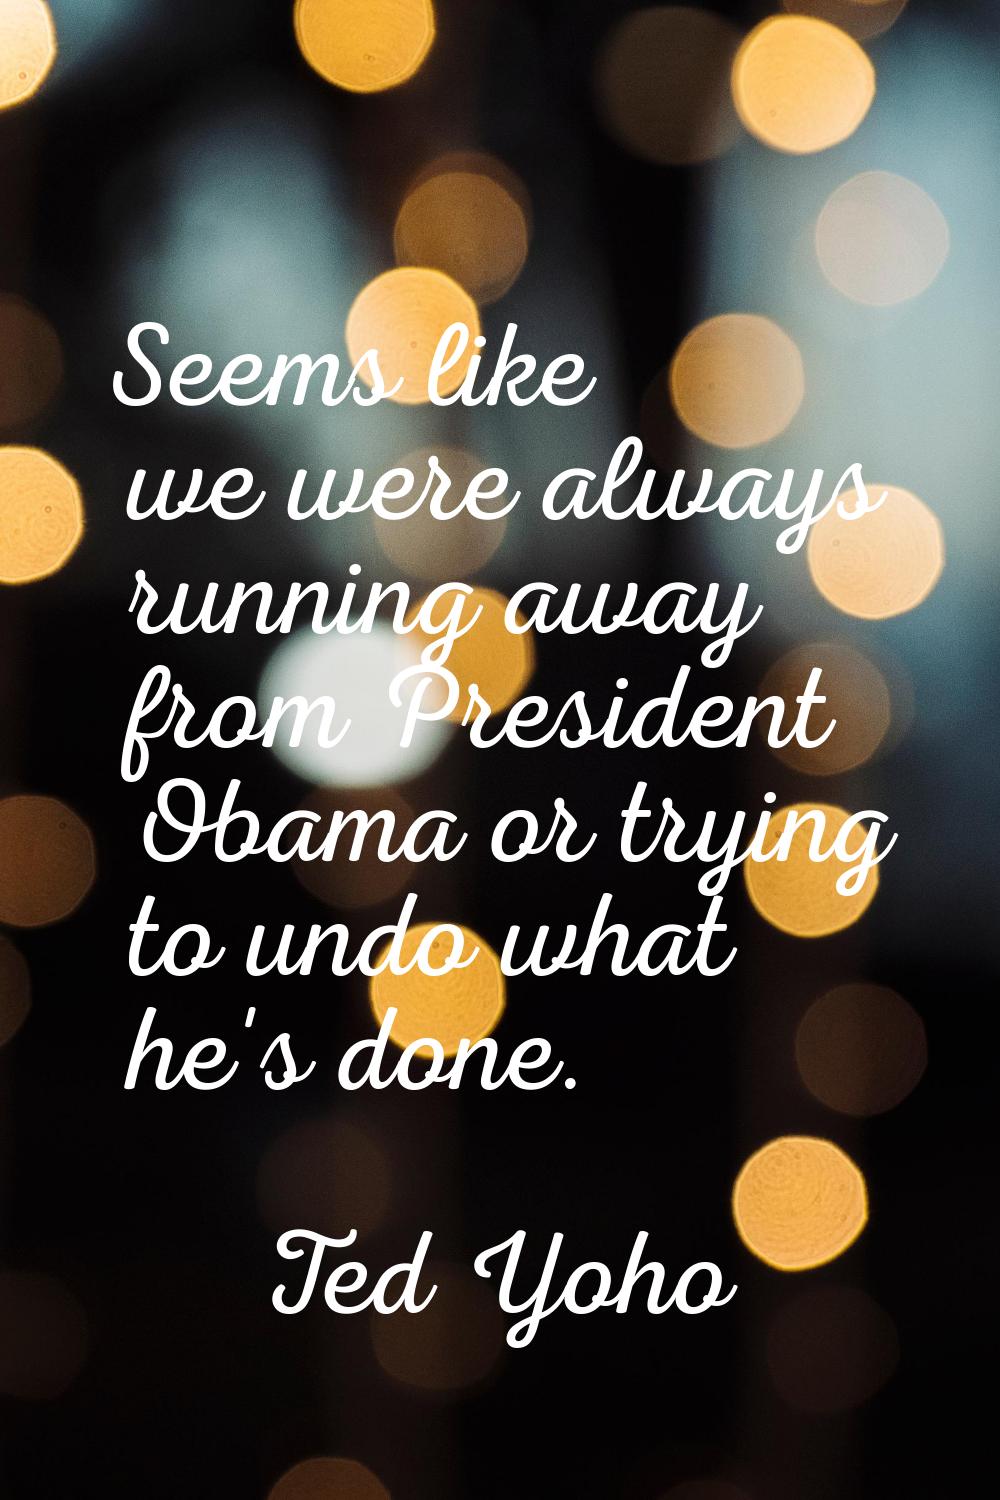 Seems like we were always running away from President Obama or trying to undo what he's done.